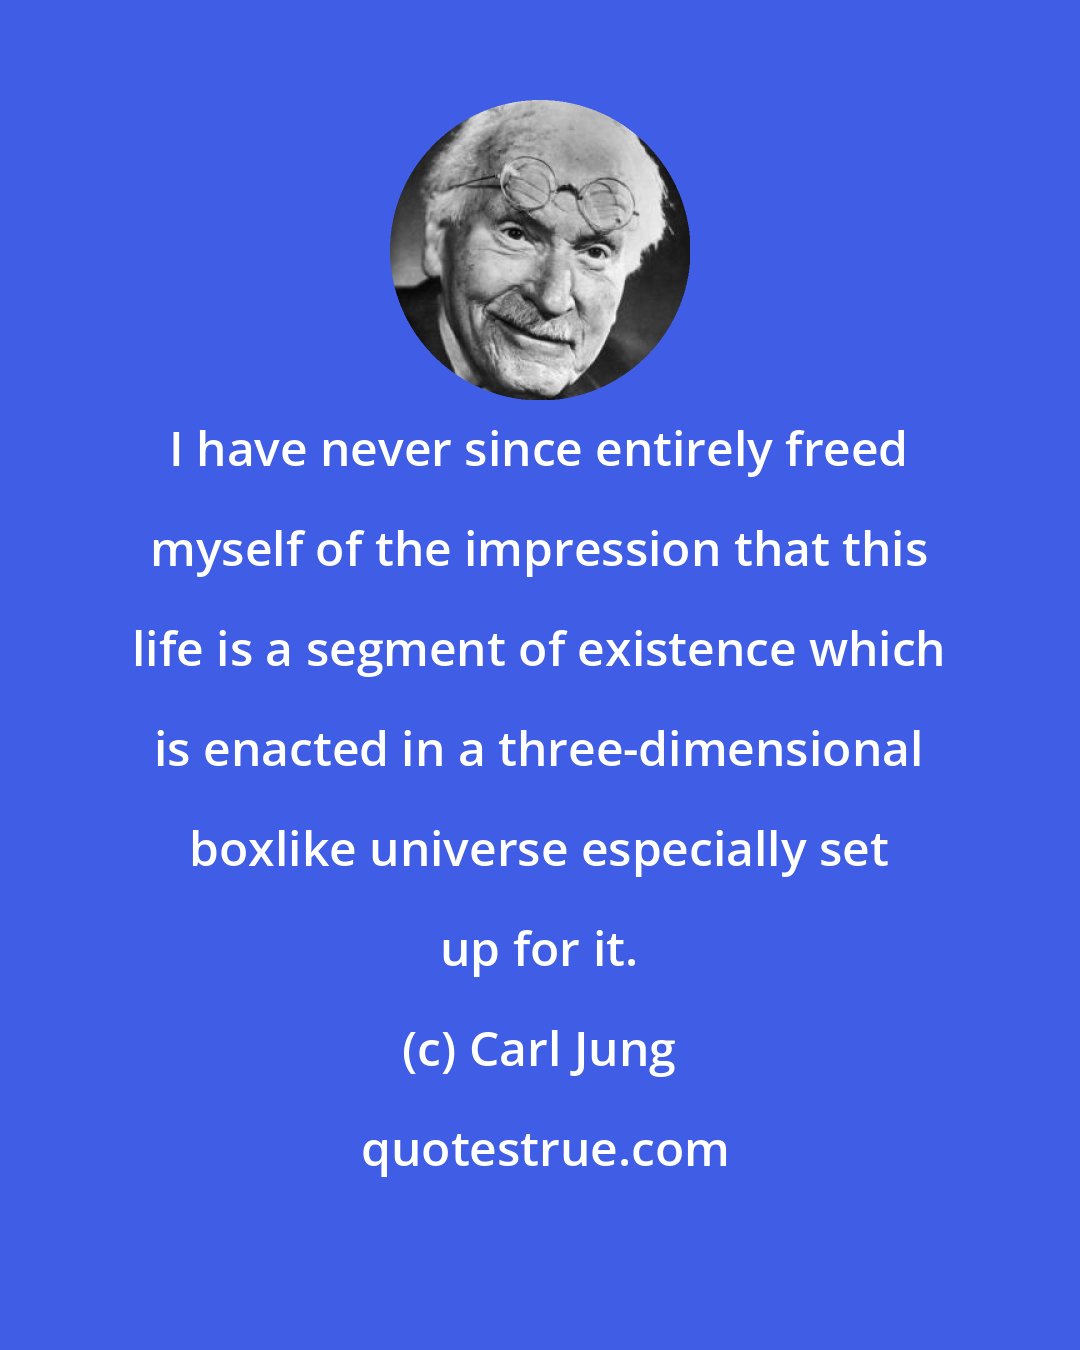 Carl Jung: I have never since entirely freed myself of the impression that this life is a segment of existence which is enacted in a three-dimensional boxlike universe especially set up for it.